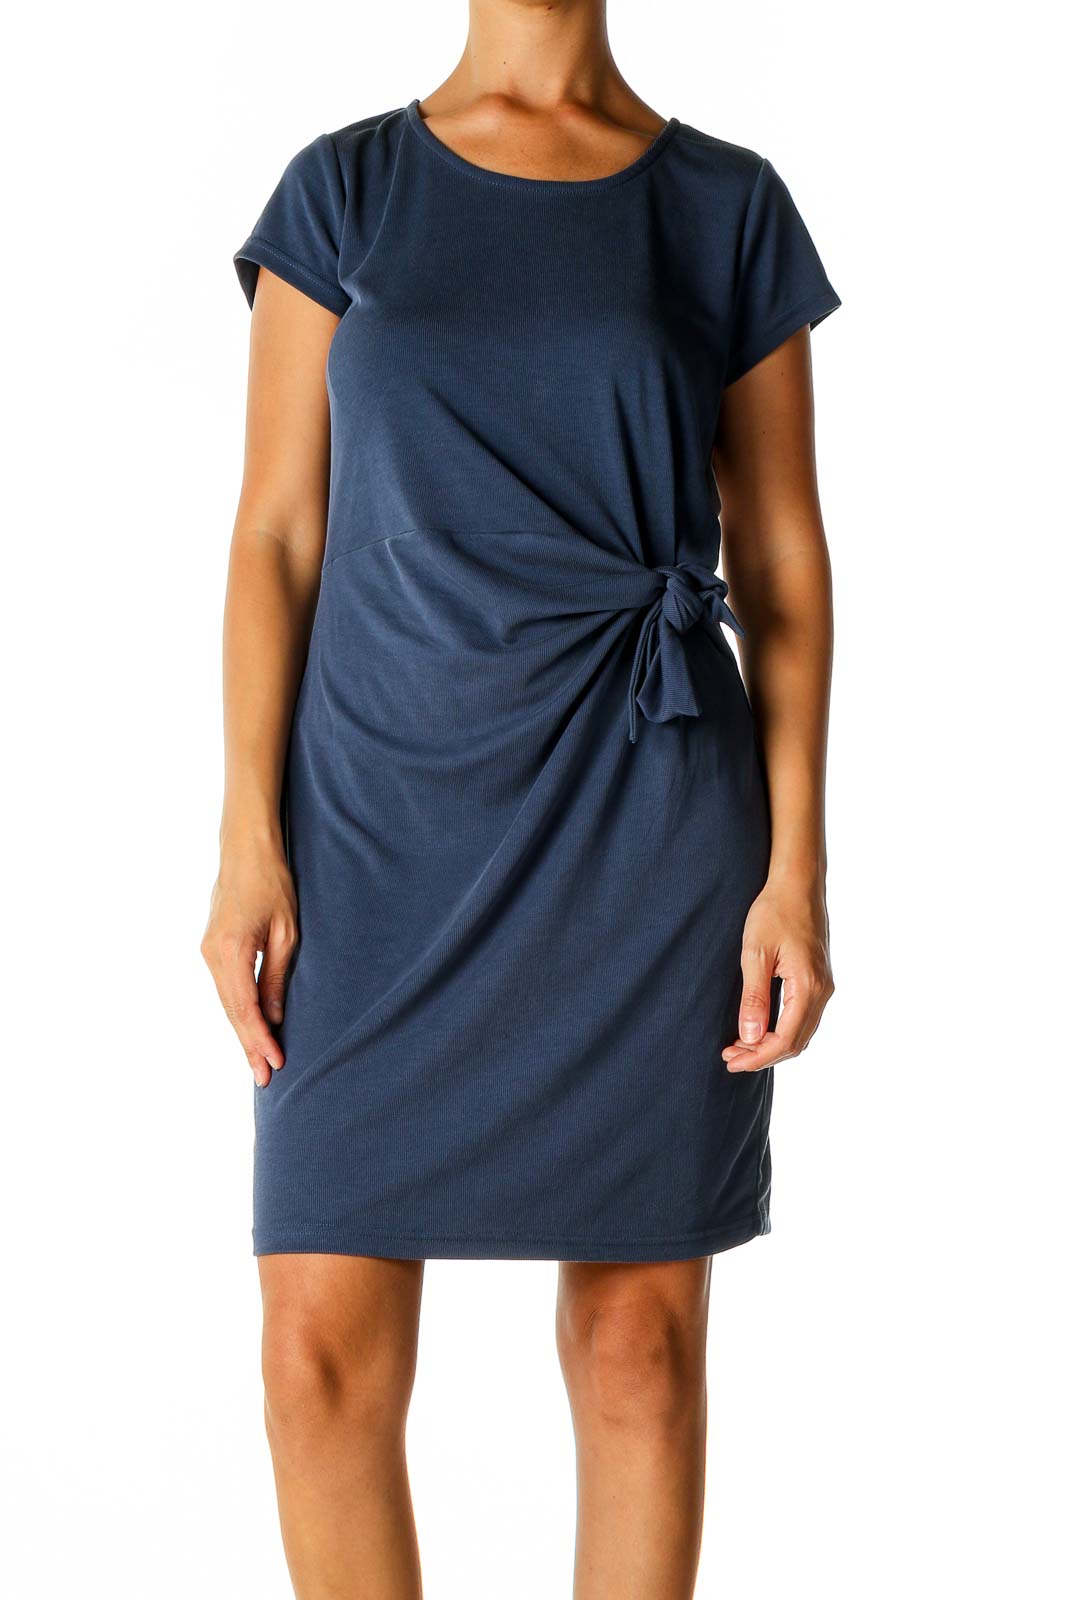 Blue Solid Day Sheath Dress Front